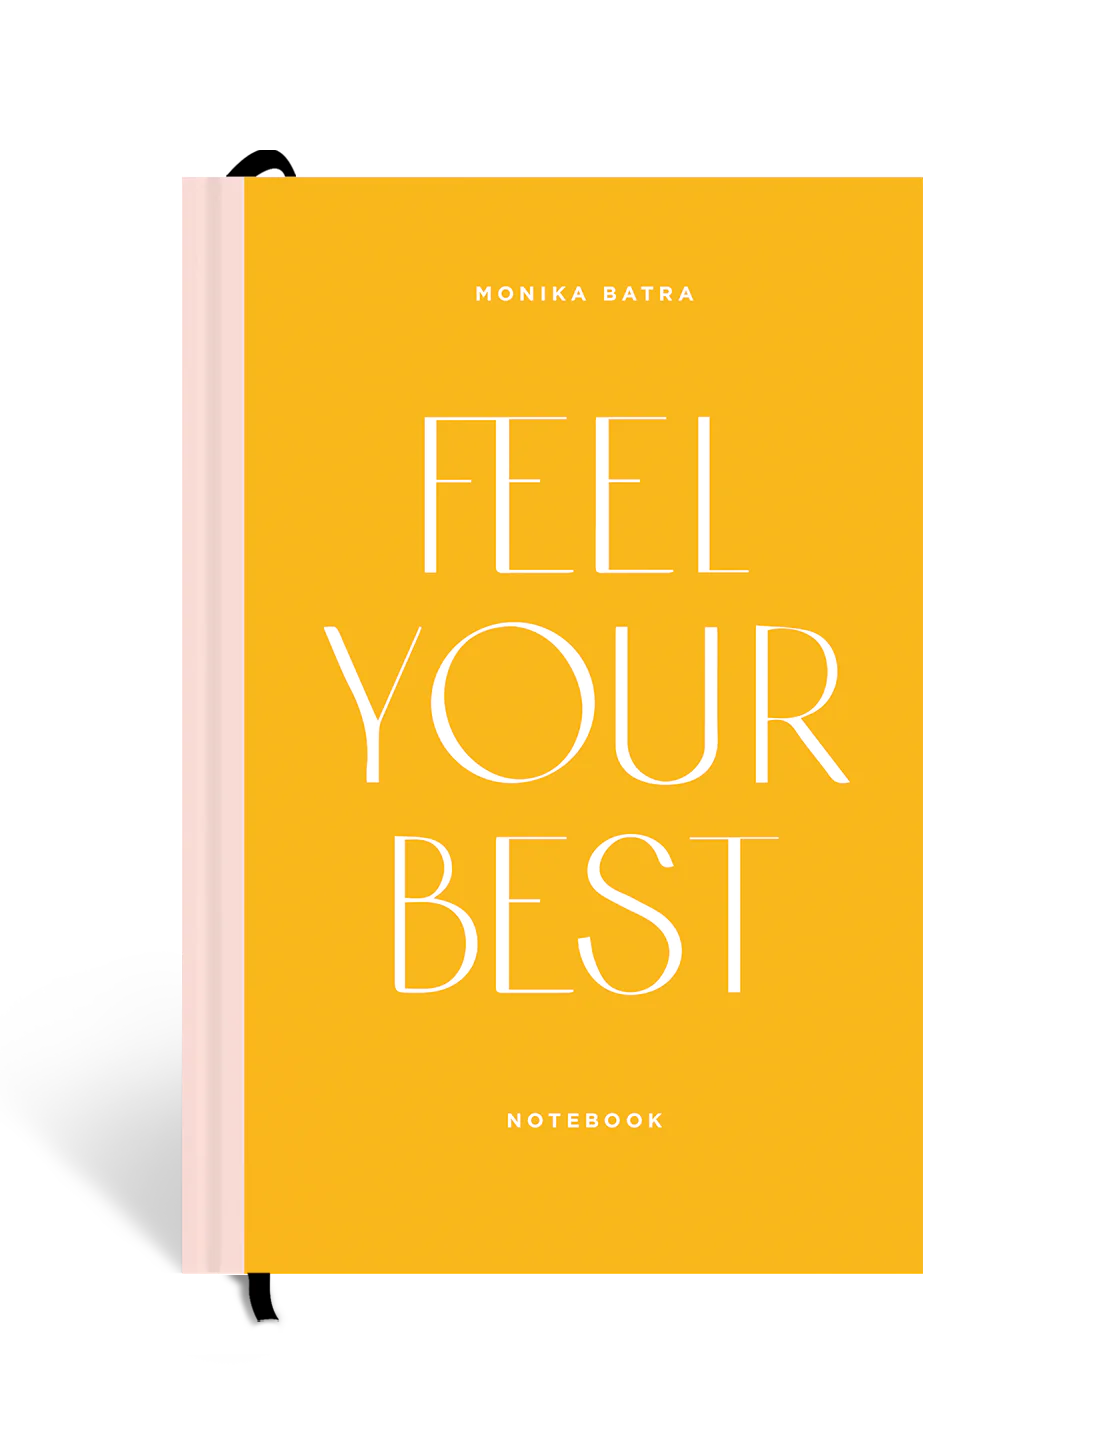 Feel Your Best